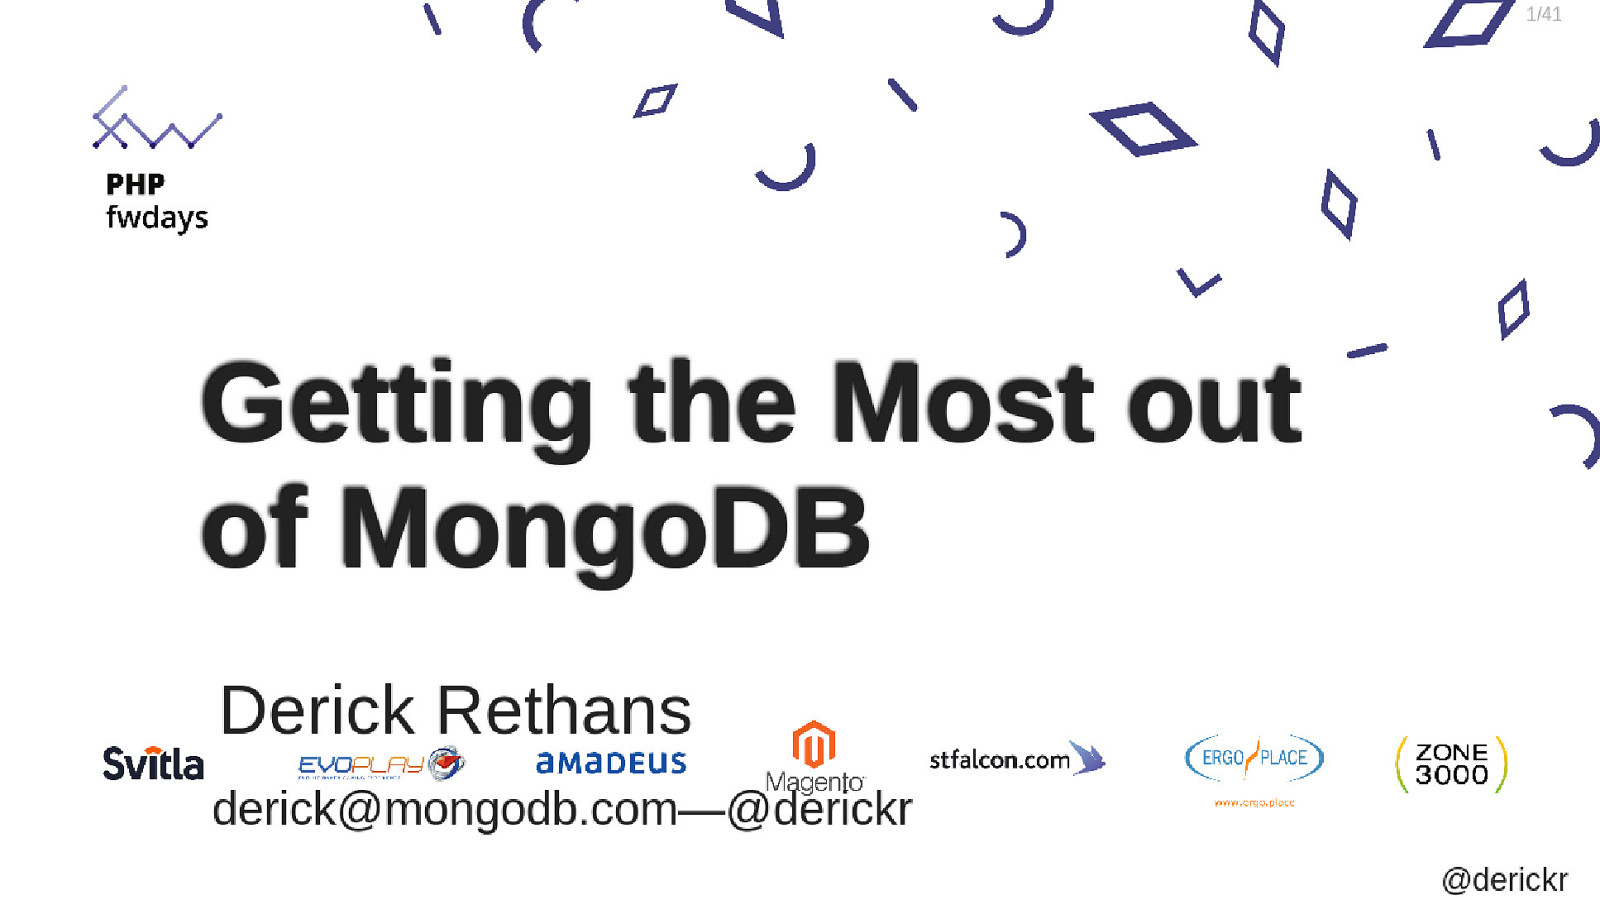 Making the Most Out of MongoDB